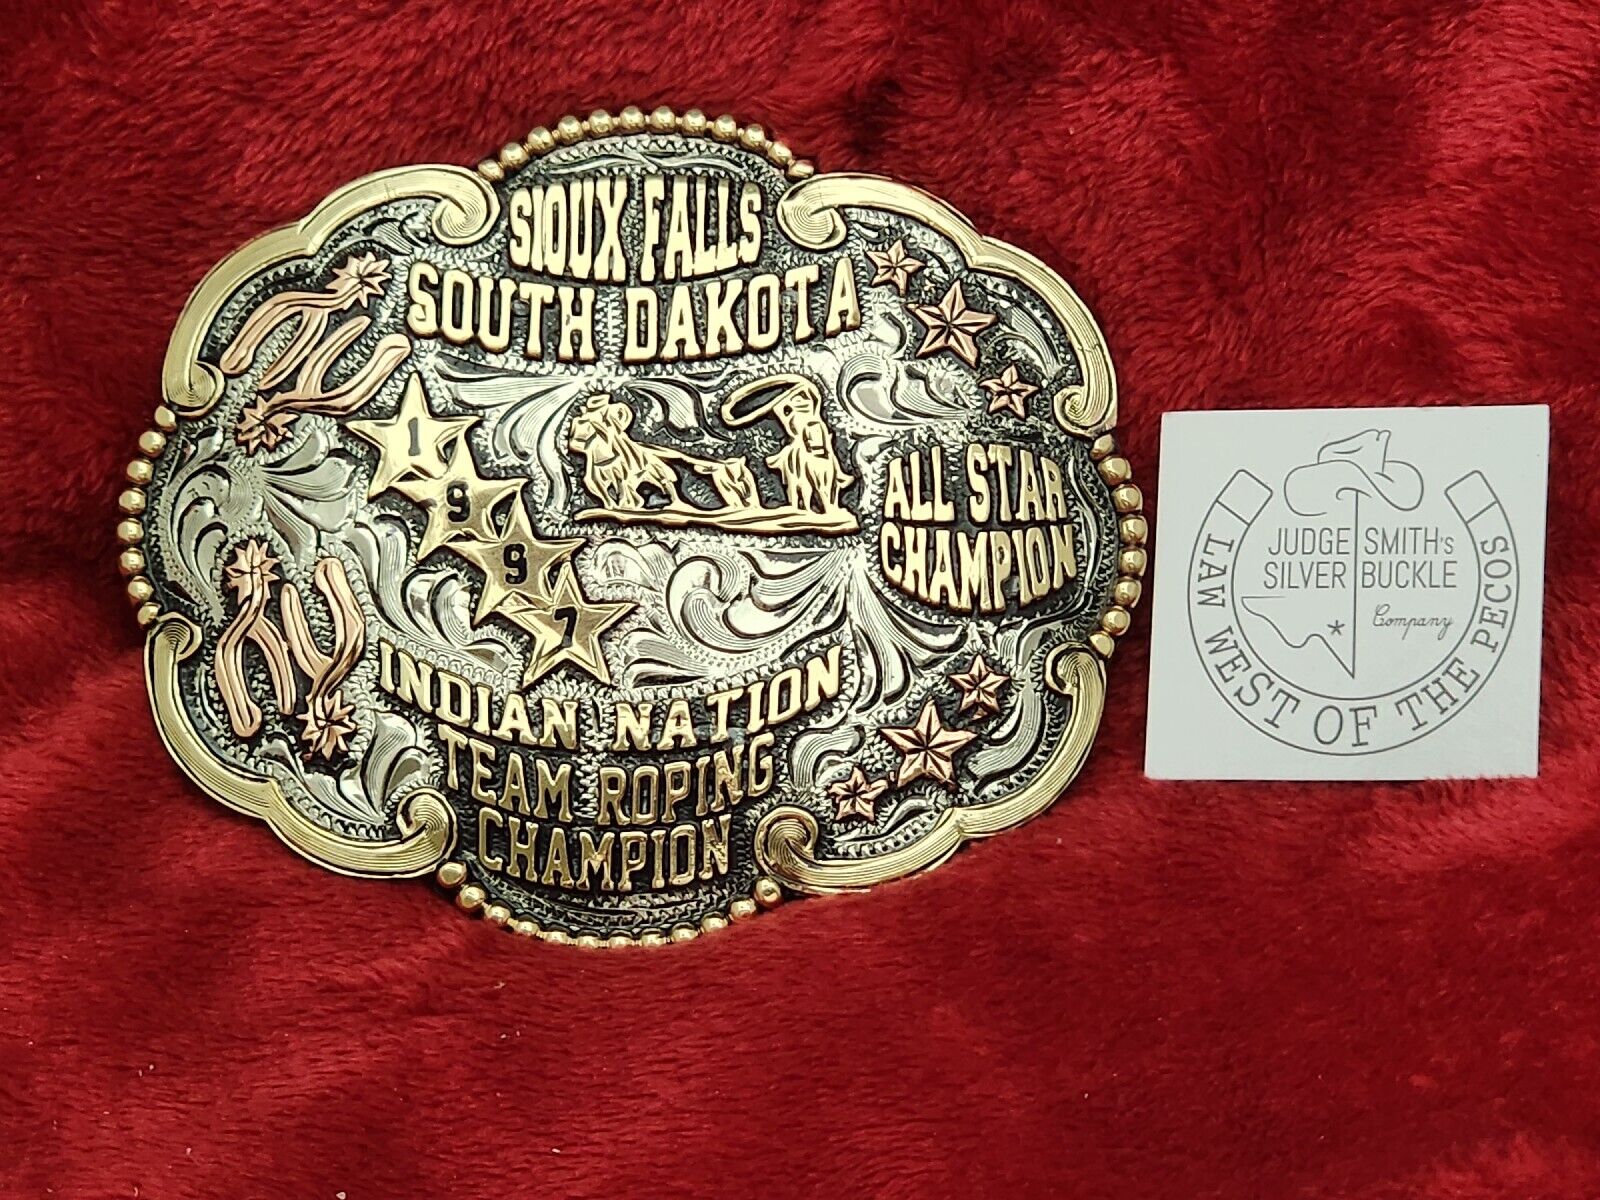 RODEO INDIAN TEAM ROPING CHAMPION TROPHY BELT BUCKLE☆SIOUX FALLS S.D.☆1997☆367